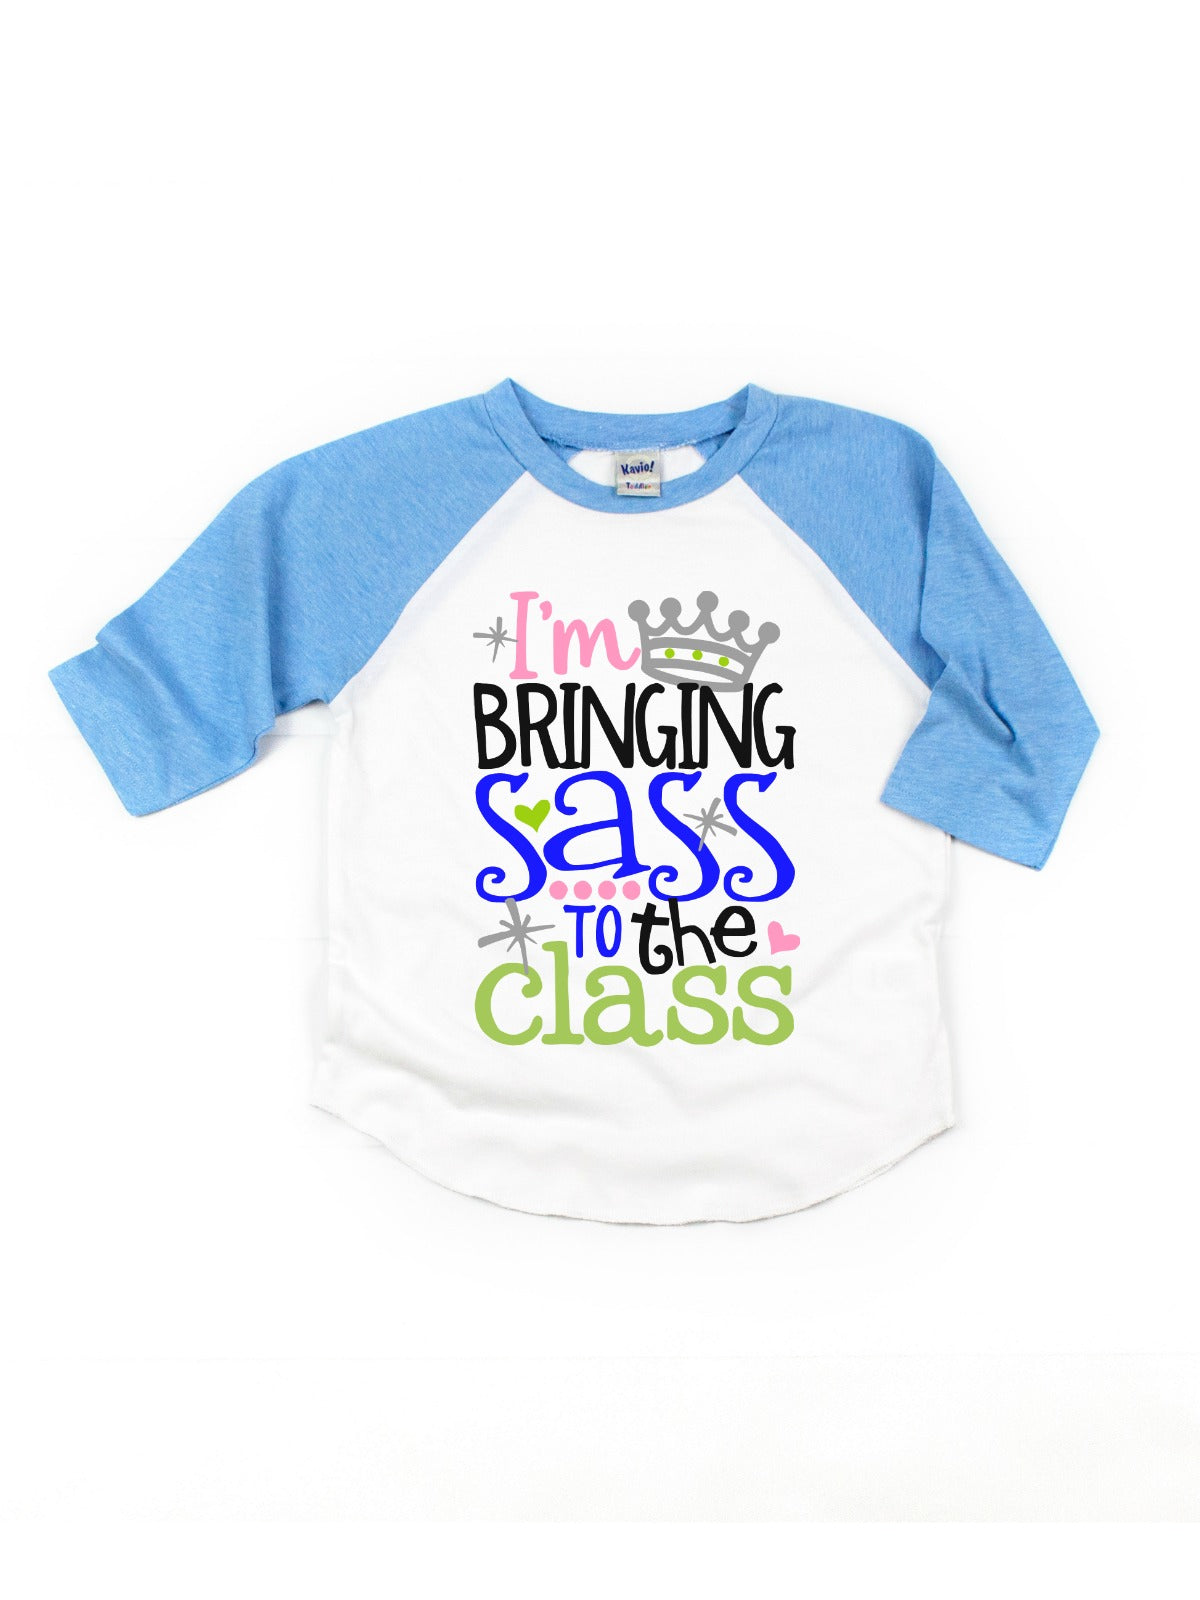 I'm Bringing Sass to the Class Kids Raglan Shirt in Blue and White